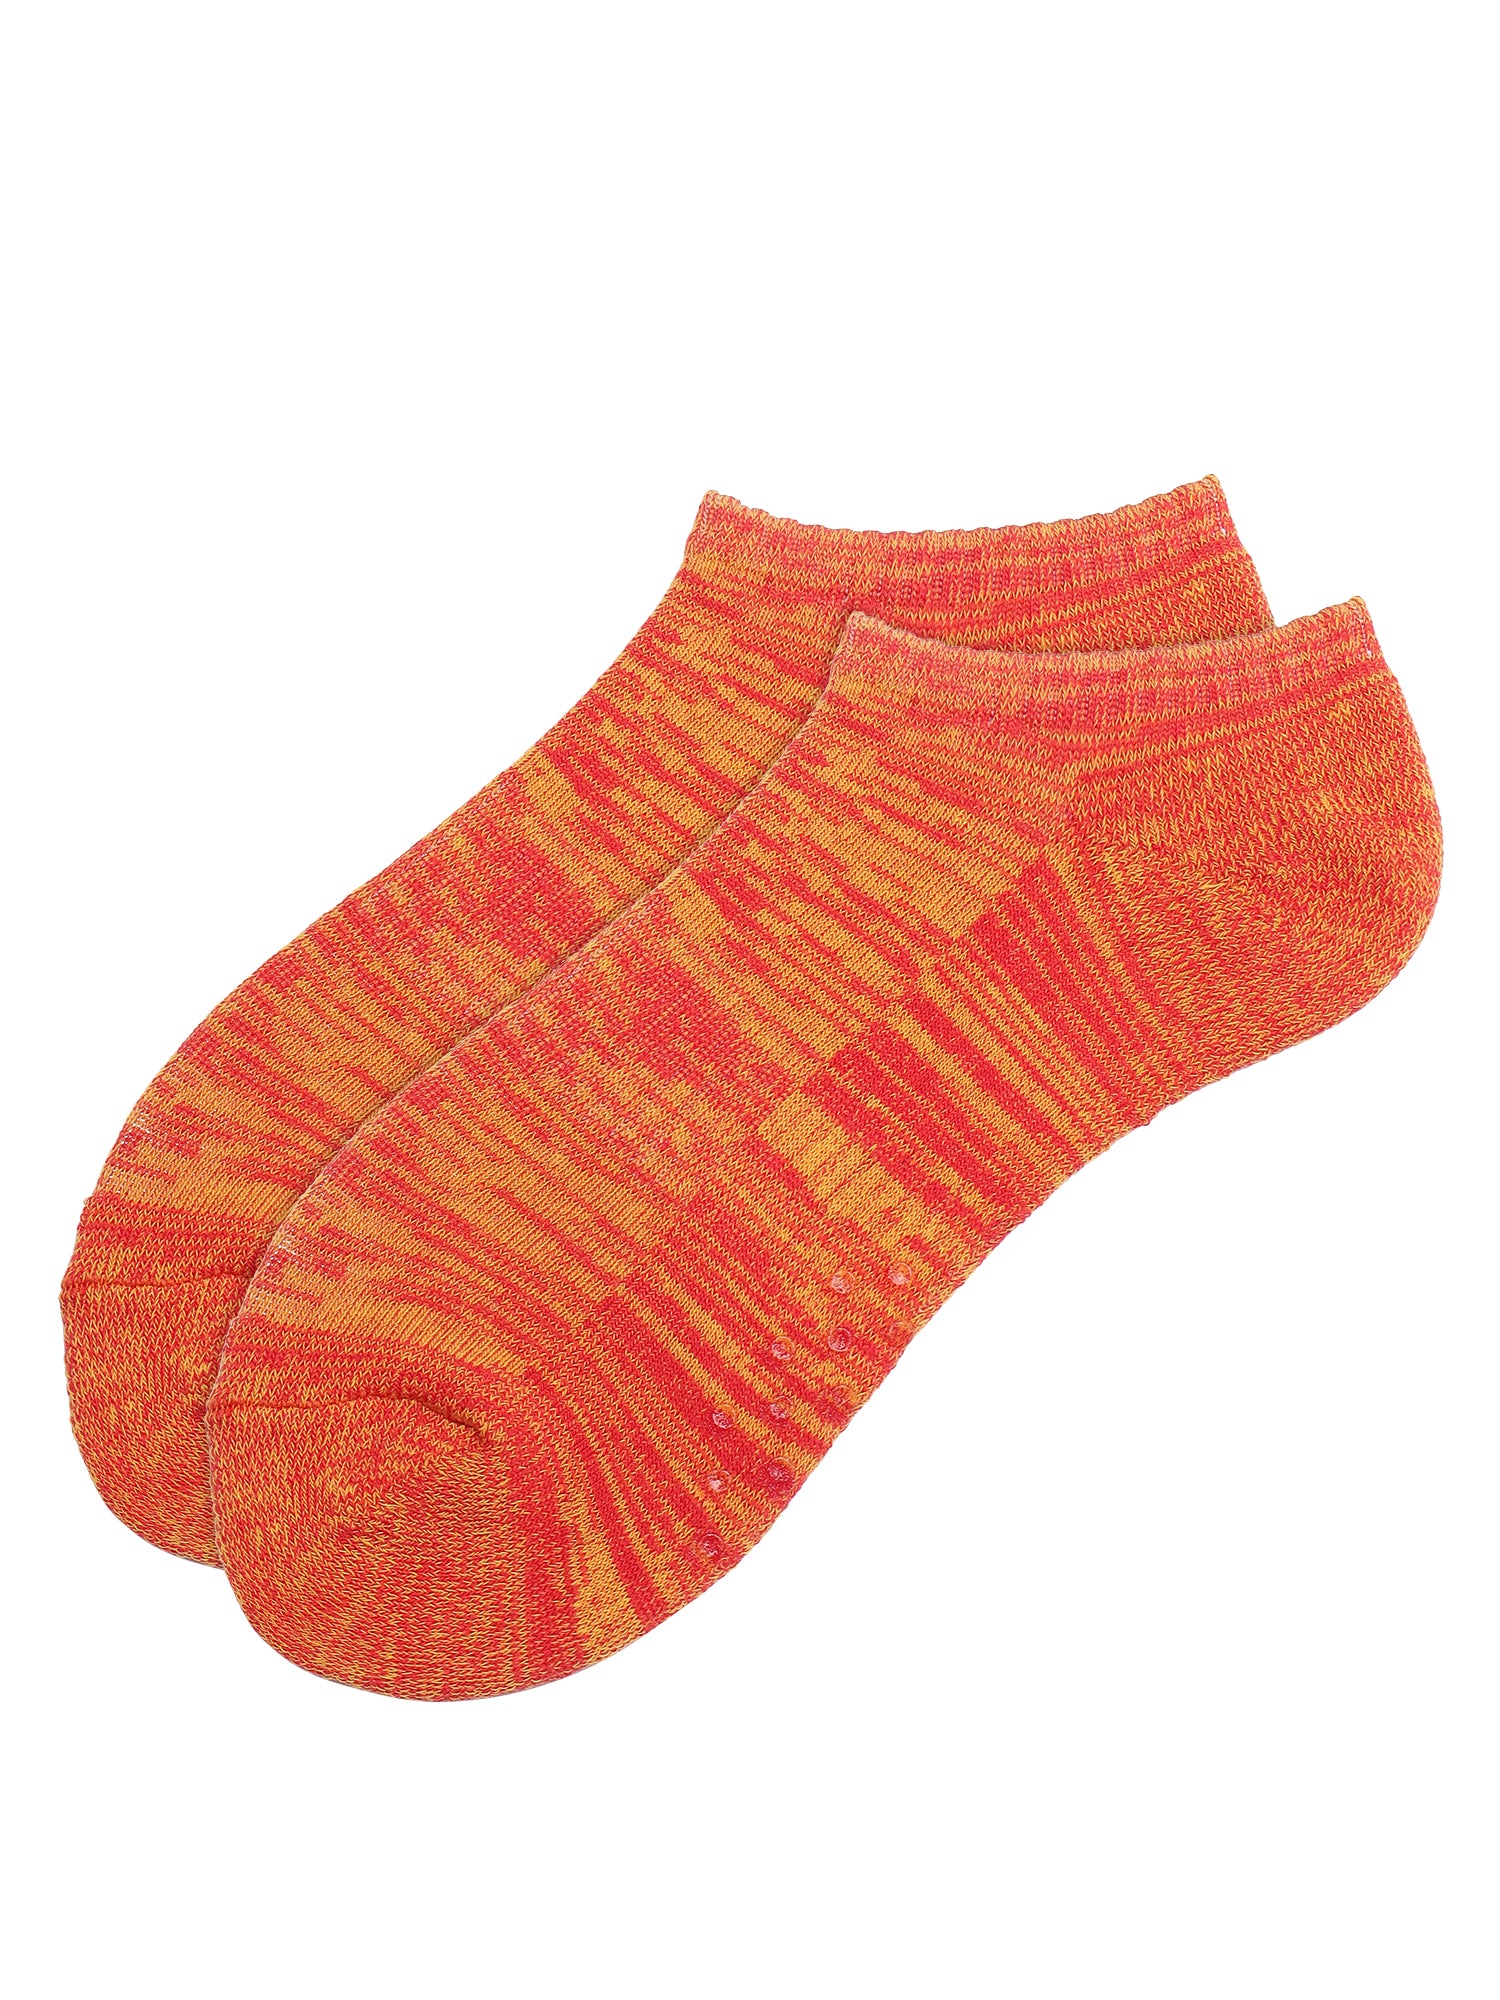 Grippers | Stand Out Box Of 4 Pairs | Low Cut Lounging Socks